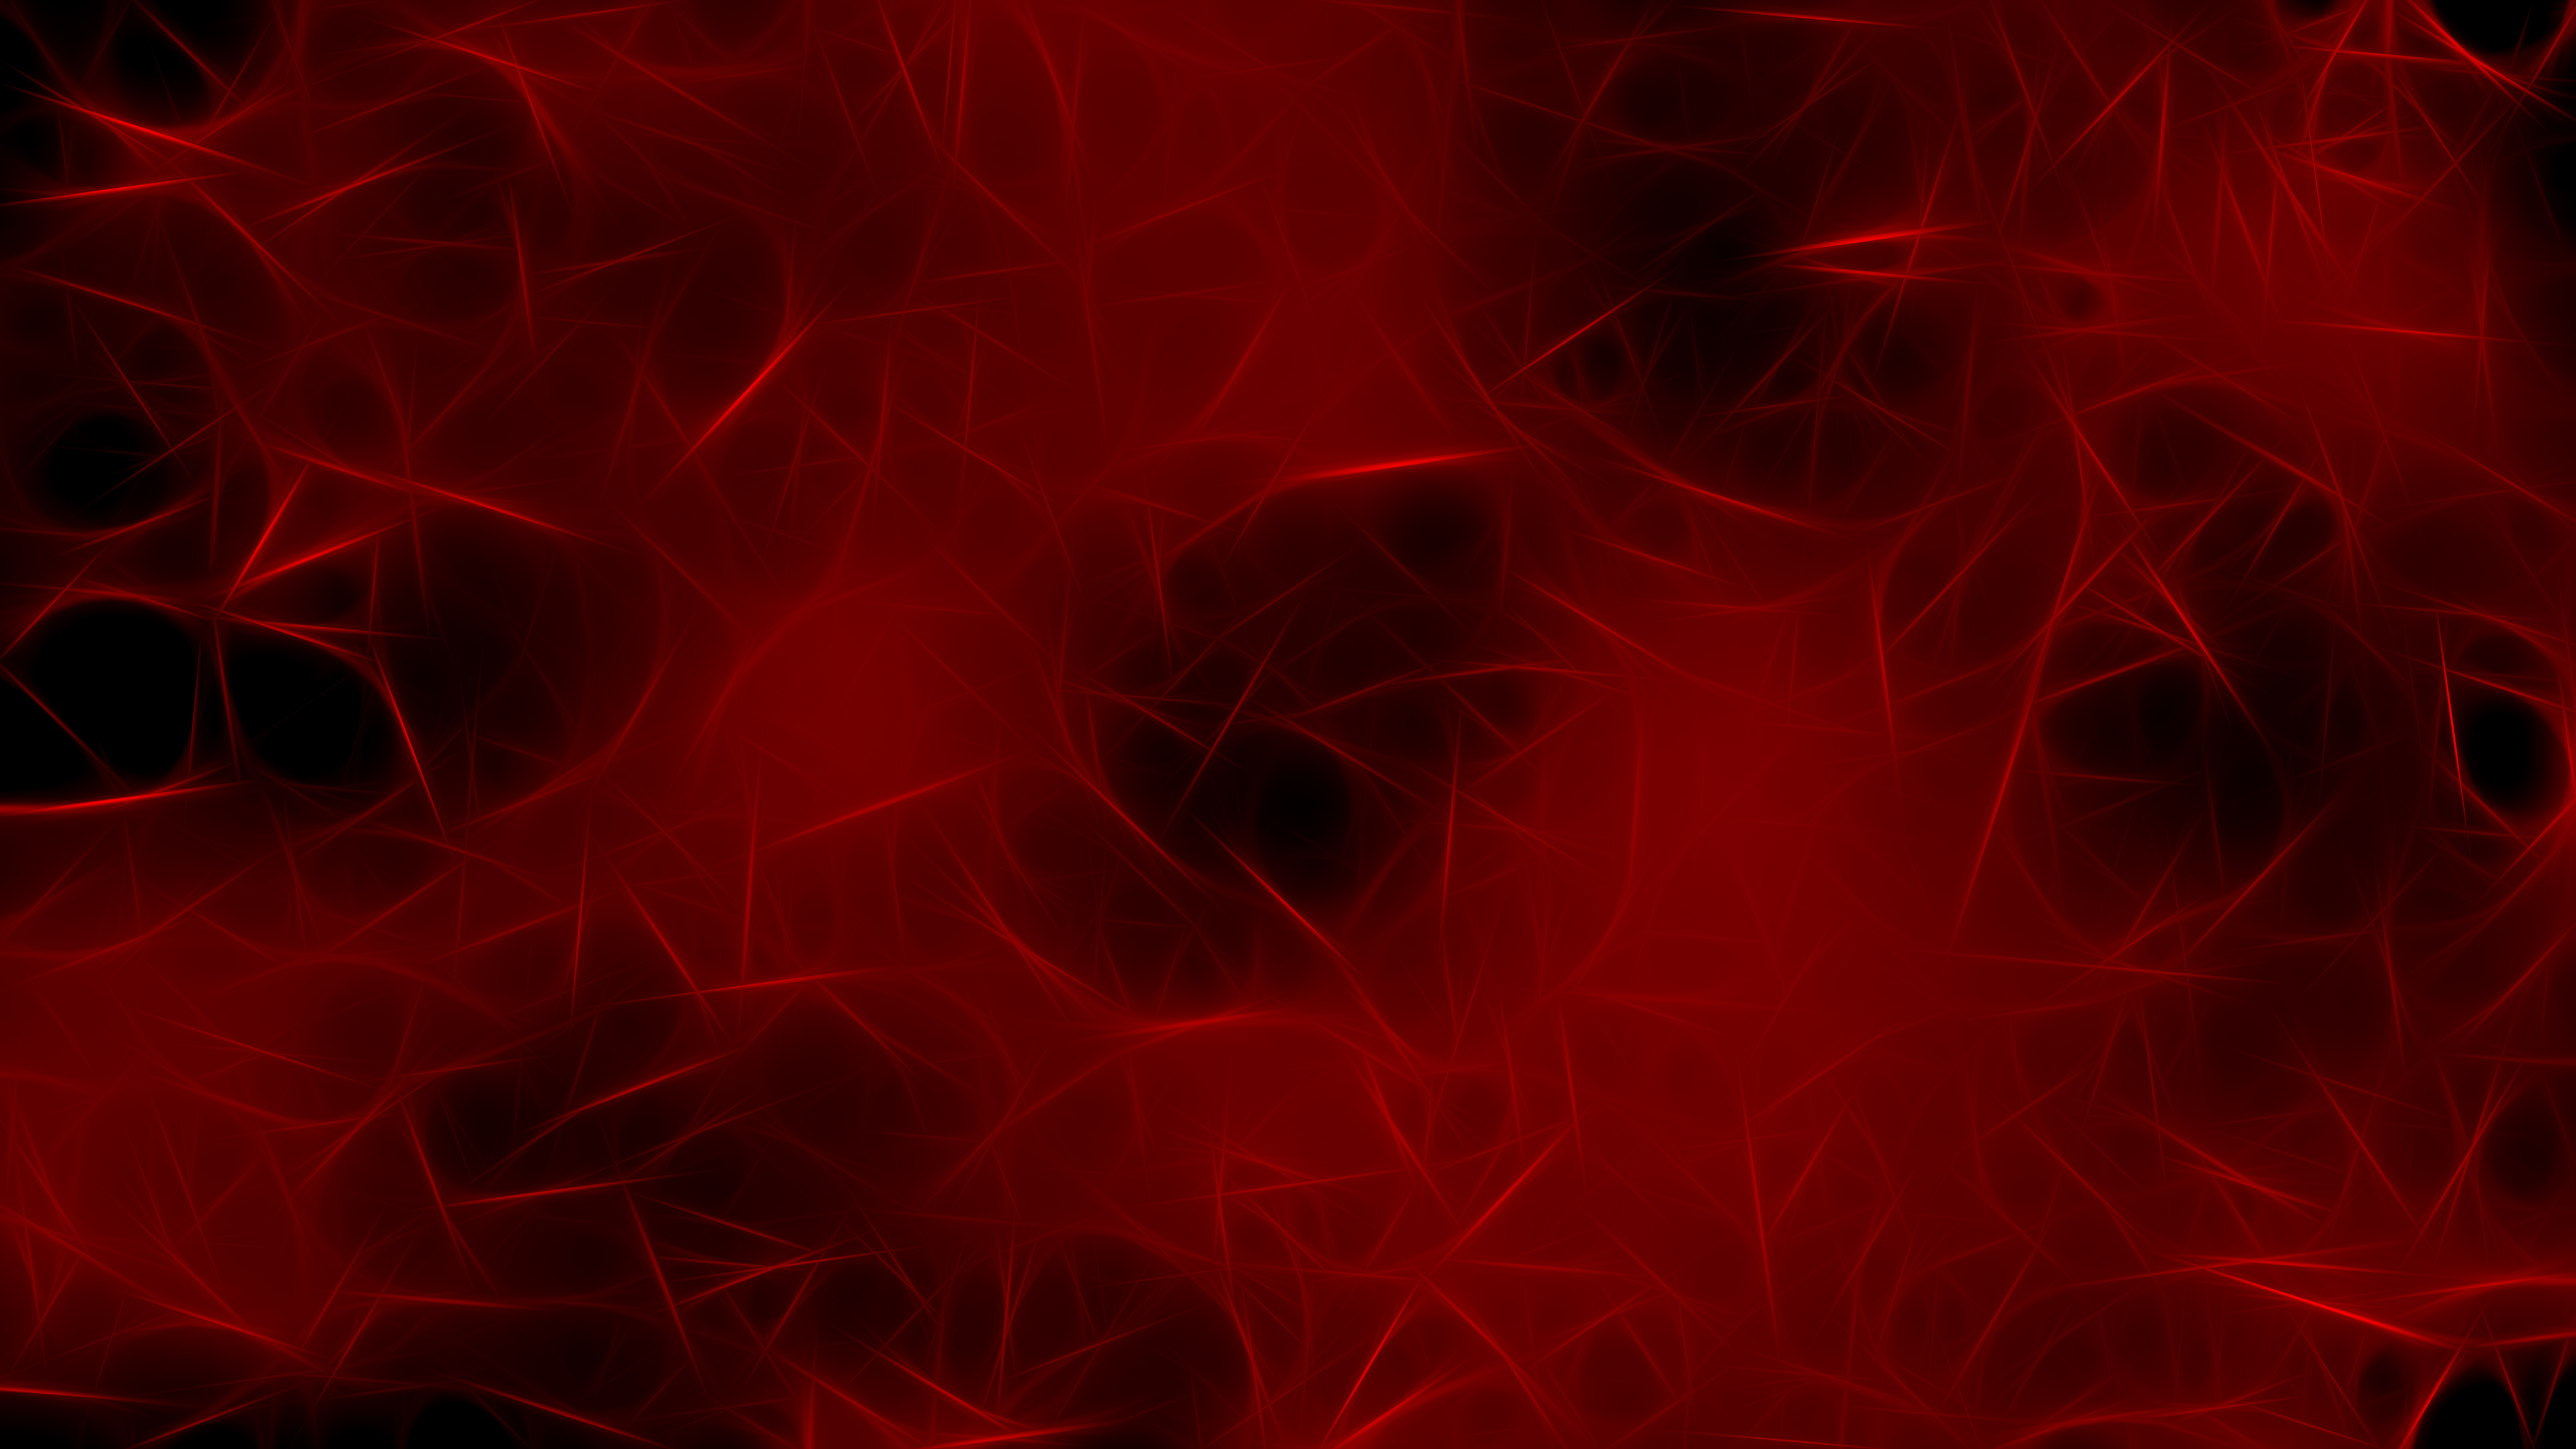 Free Abstract Red and Black Fractal Wallpaper